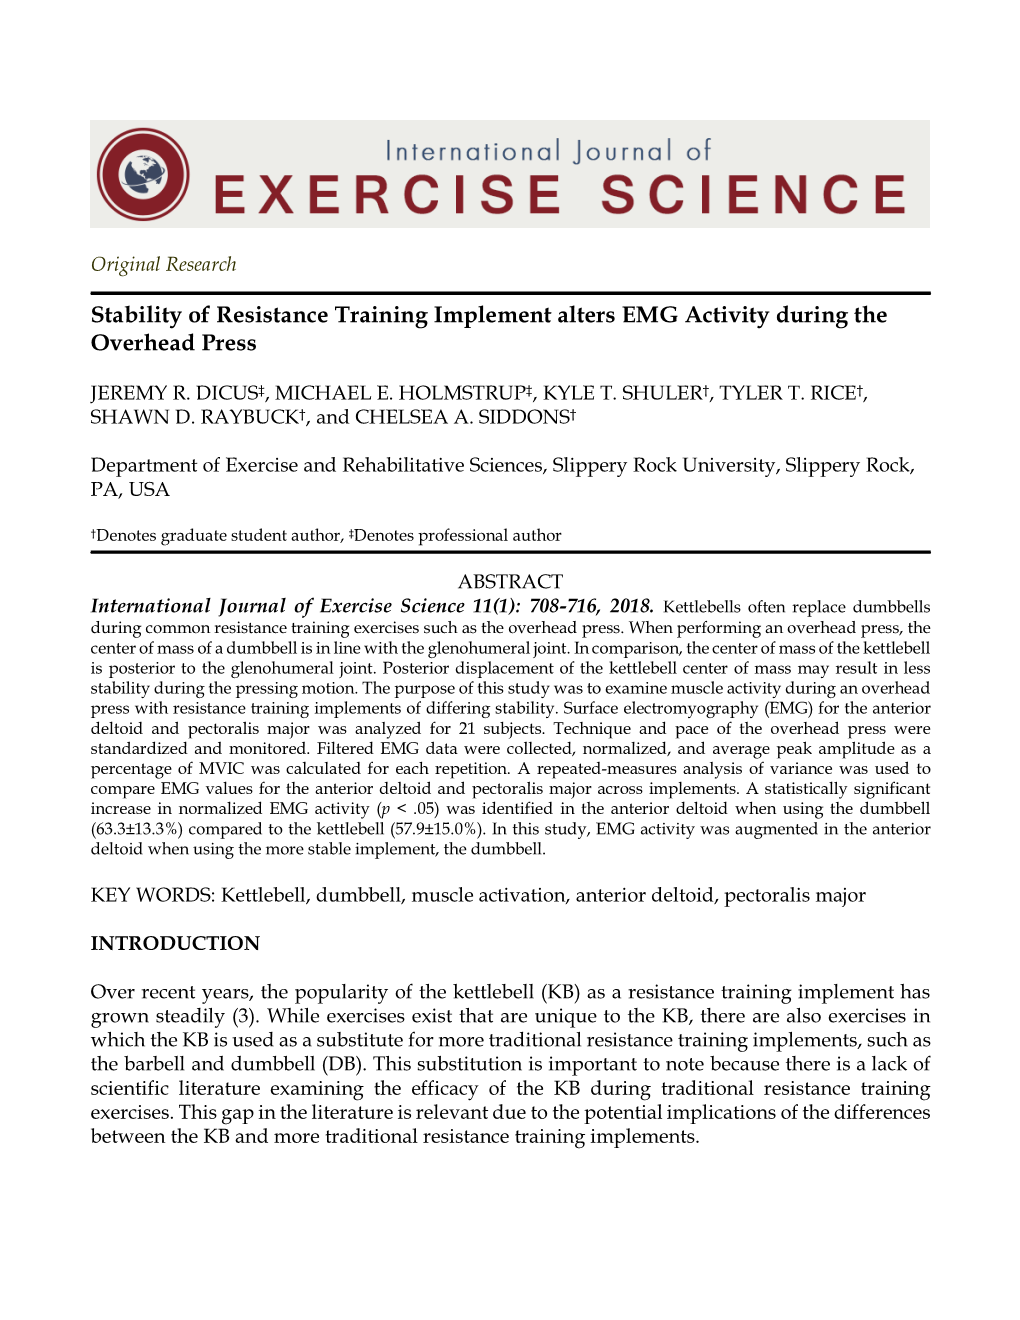 Stability of Resistance Training Implement Alters EMG Activity During the Overhead Press